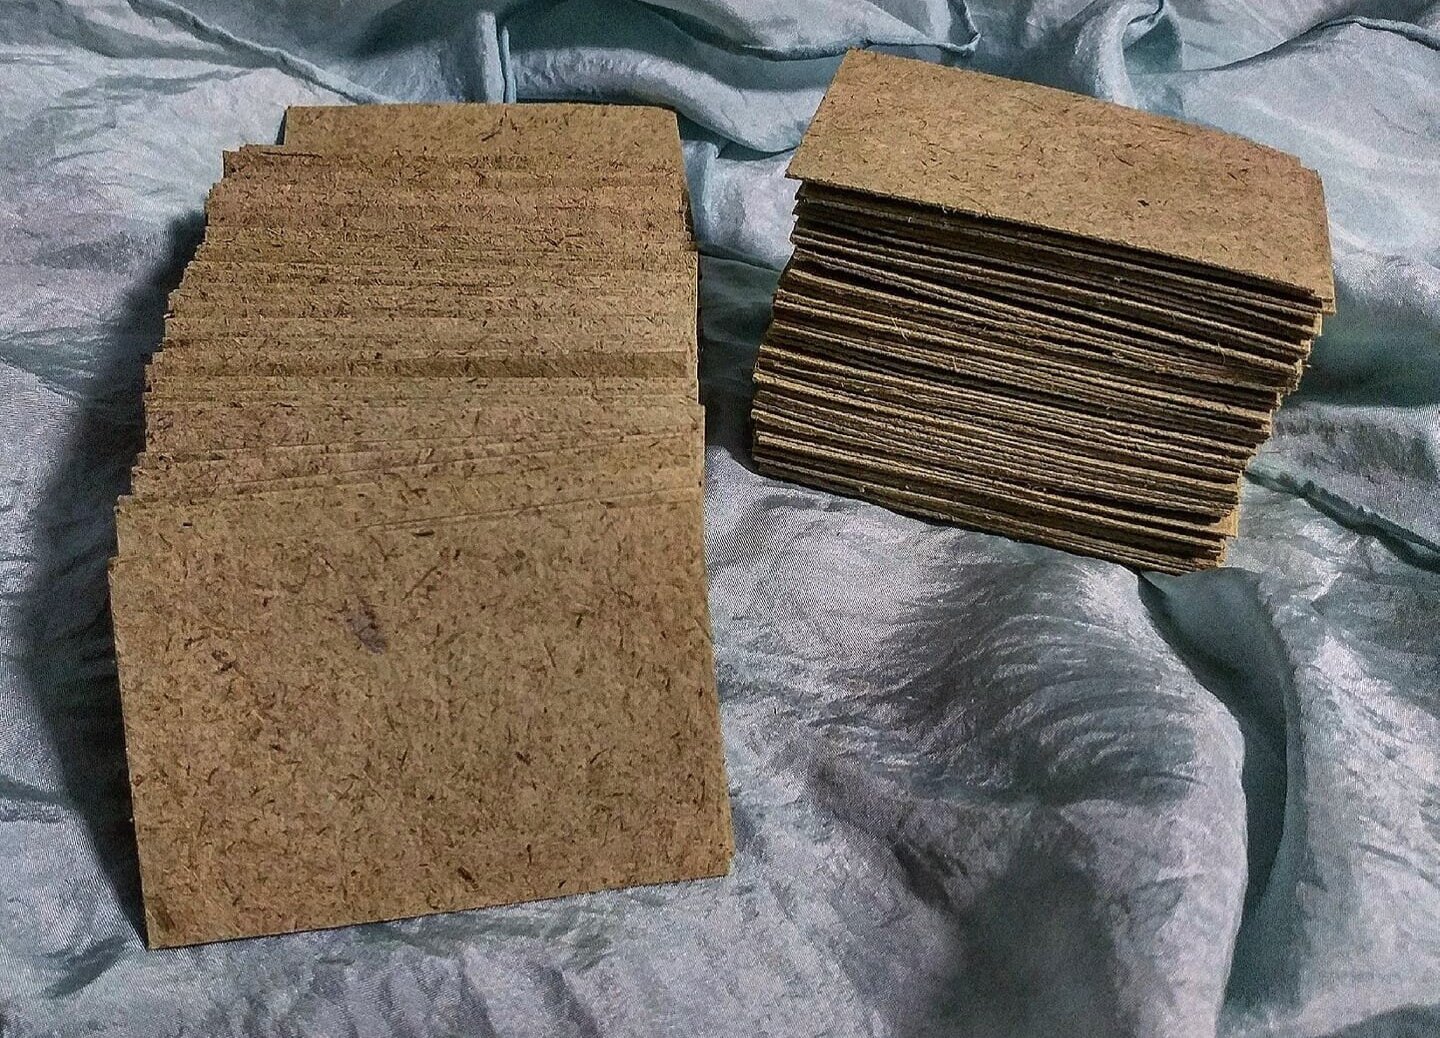  108 swatches of my handmade Non-native Phragmite and house blend (recycled cotton, abaca, flax and kozo) paper cut down to size (2x3") for the Swatch Swap 2019!&nbsp; 